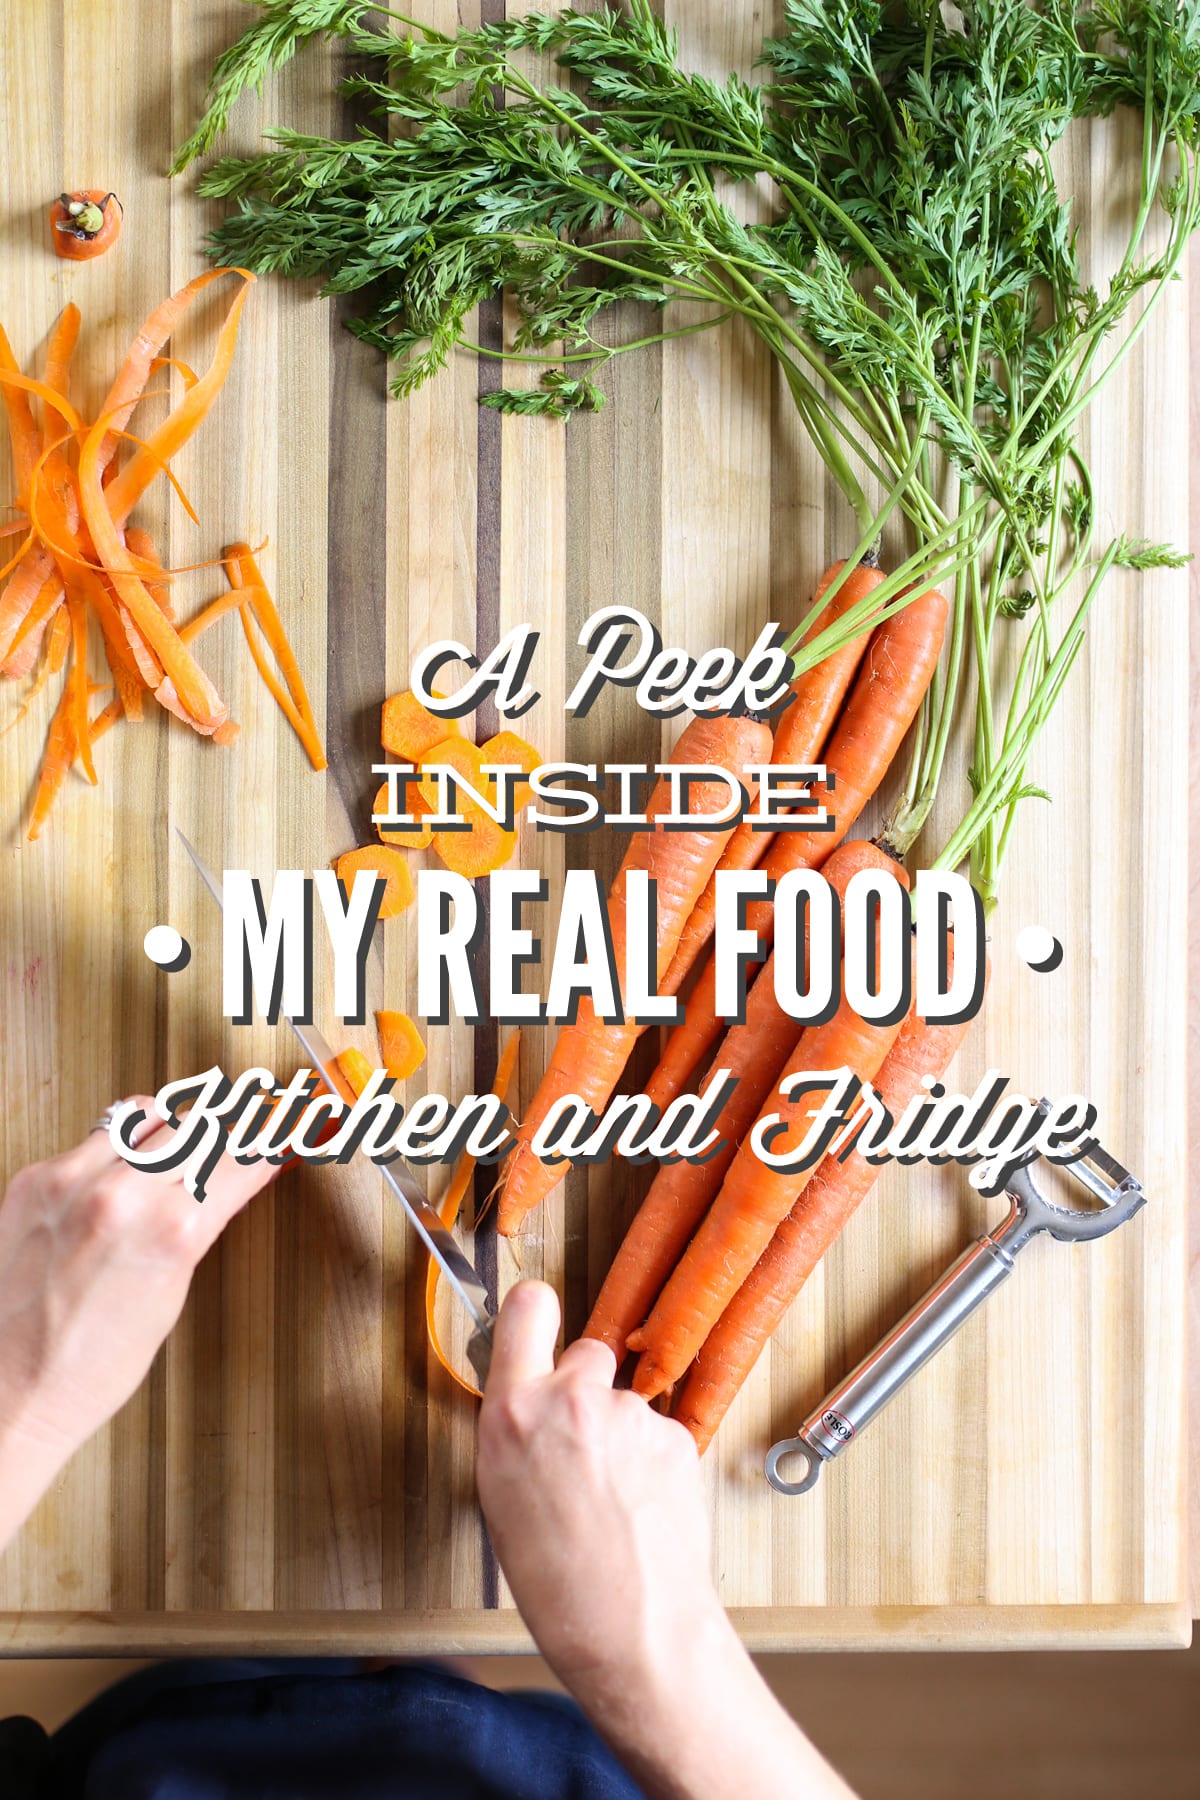 A Peek Inside My Real Food Kitchen and Fridge: A Video Tour